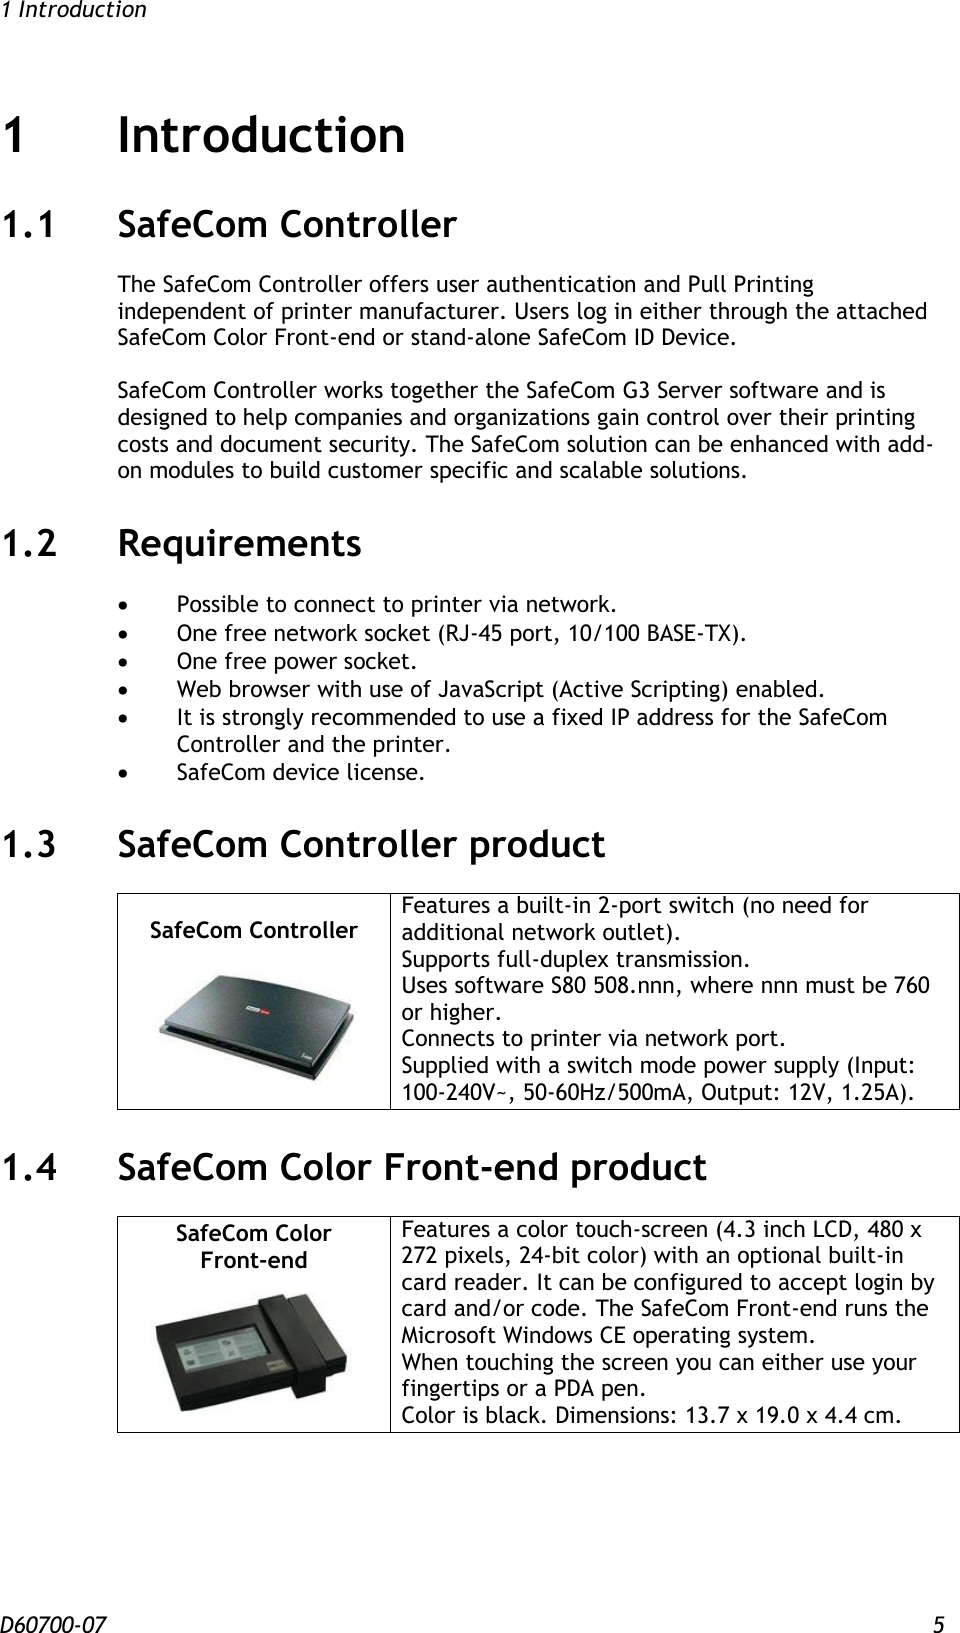 1 Introduction D60700-07 5 1 Introduction 1.1 SafeCom Controller The SafeCom Controller offers user authentication and Pull Printing independent of printer manufacturer. Users log in either through the attached SafeCom Color Front-end or stand-alone SafeCom ID Device.   SafeCom Controller works together the SafeCom G3 Server software and is designed to help companies and organizations gain control over their printing costs and document security. The SafeCom solution can be enhanced with add-on modules to build customer specific and scalable solutions. 1.2 Requirements   Possible to connect to printer via network.  One free network socket (RJ-45 port, 10/100 BASE-TX).  One free power socket.  Web browser with use of JavaScript (Active Scripting) enabled.  It is strongly recommended to use a fixed IP address for the SafeCom Controller and the printer.  SafeCom device license. 1.3 SafeCom Controller product SafeCom Controller   Features a built-in 2-port switch (no need for additional network outlet).  Supports full-duplex transmission.  Uses software S80 508.nnn, where nnn must be 760 or higher. Connects to printer via network port. Supplied with a switch mode power supply (Input: 100-240V~, 50-60Hz/500mA, Output: 12V, 1.25A). 1.4 SafeCom Color Front-end product SafeCom Color Front-end  Features a color touch-screen (4.3 inch LCD, 480 x 272 pixels, 24-bit color) with an optional built-in card reader. It can be configured to accept login by card and/or code. The SafeCom Front-end runs the Microsoft Windows CE operating system. When touching the screen you can either use your fingertips or a PDA pen.  Color is black. Dimensions: 13.7 x 19.0 x 4.4 cm.  